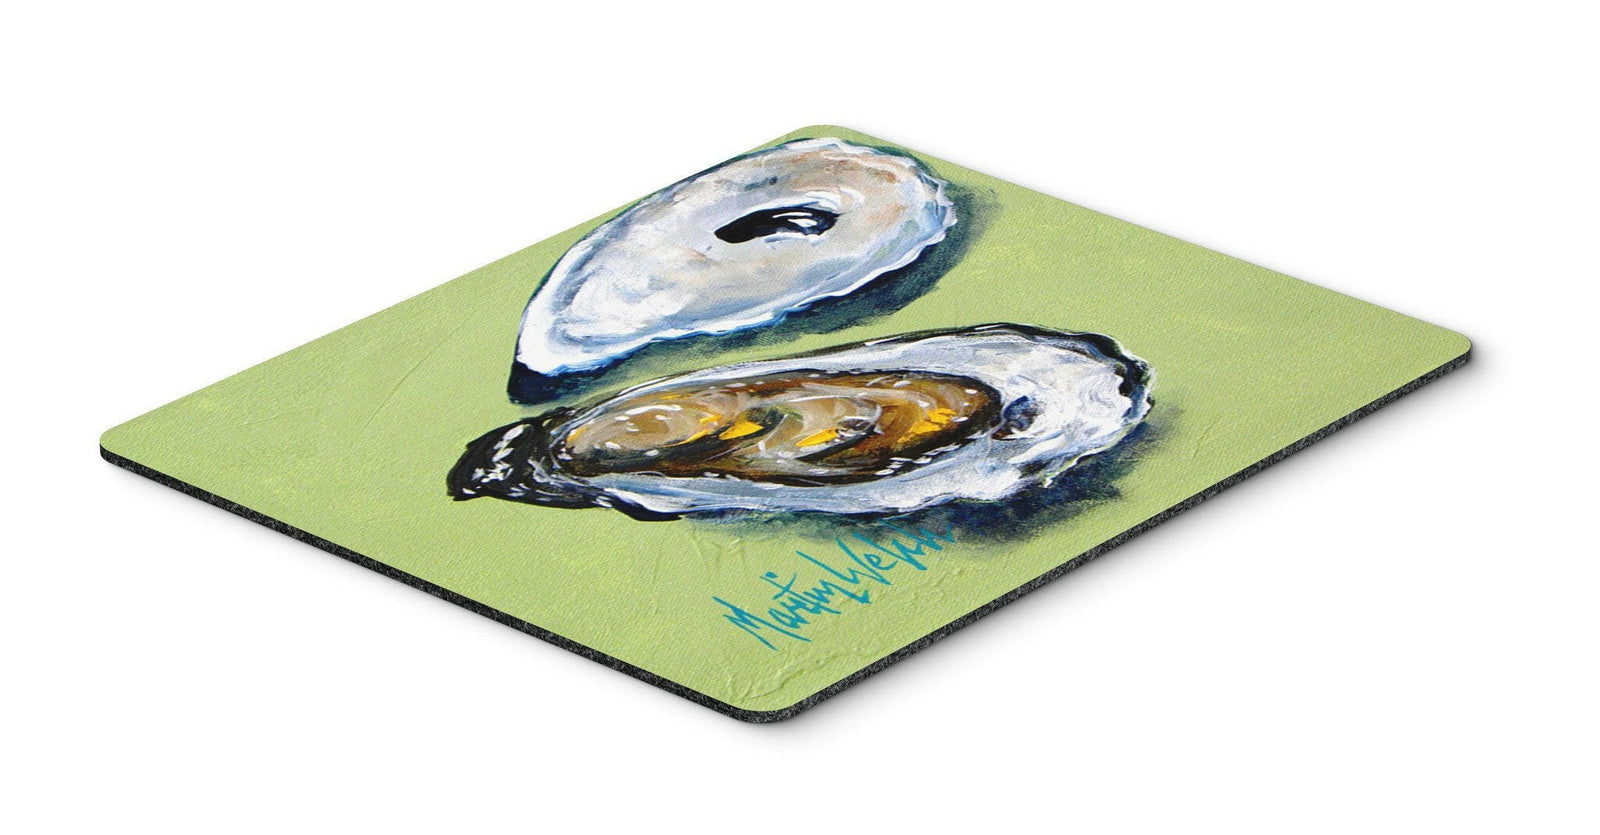 Oysters Two Shells Mouse Pad, Hot Pad or Trivet by Caroline's Treasures